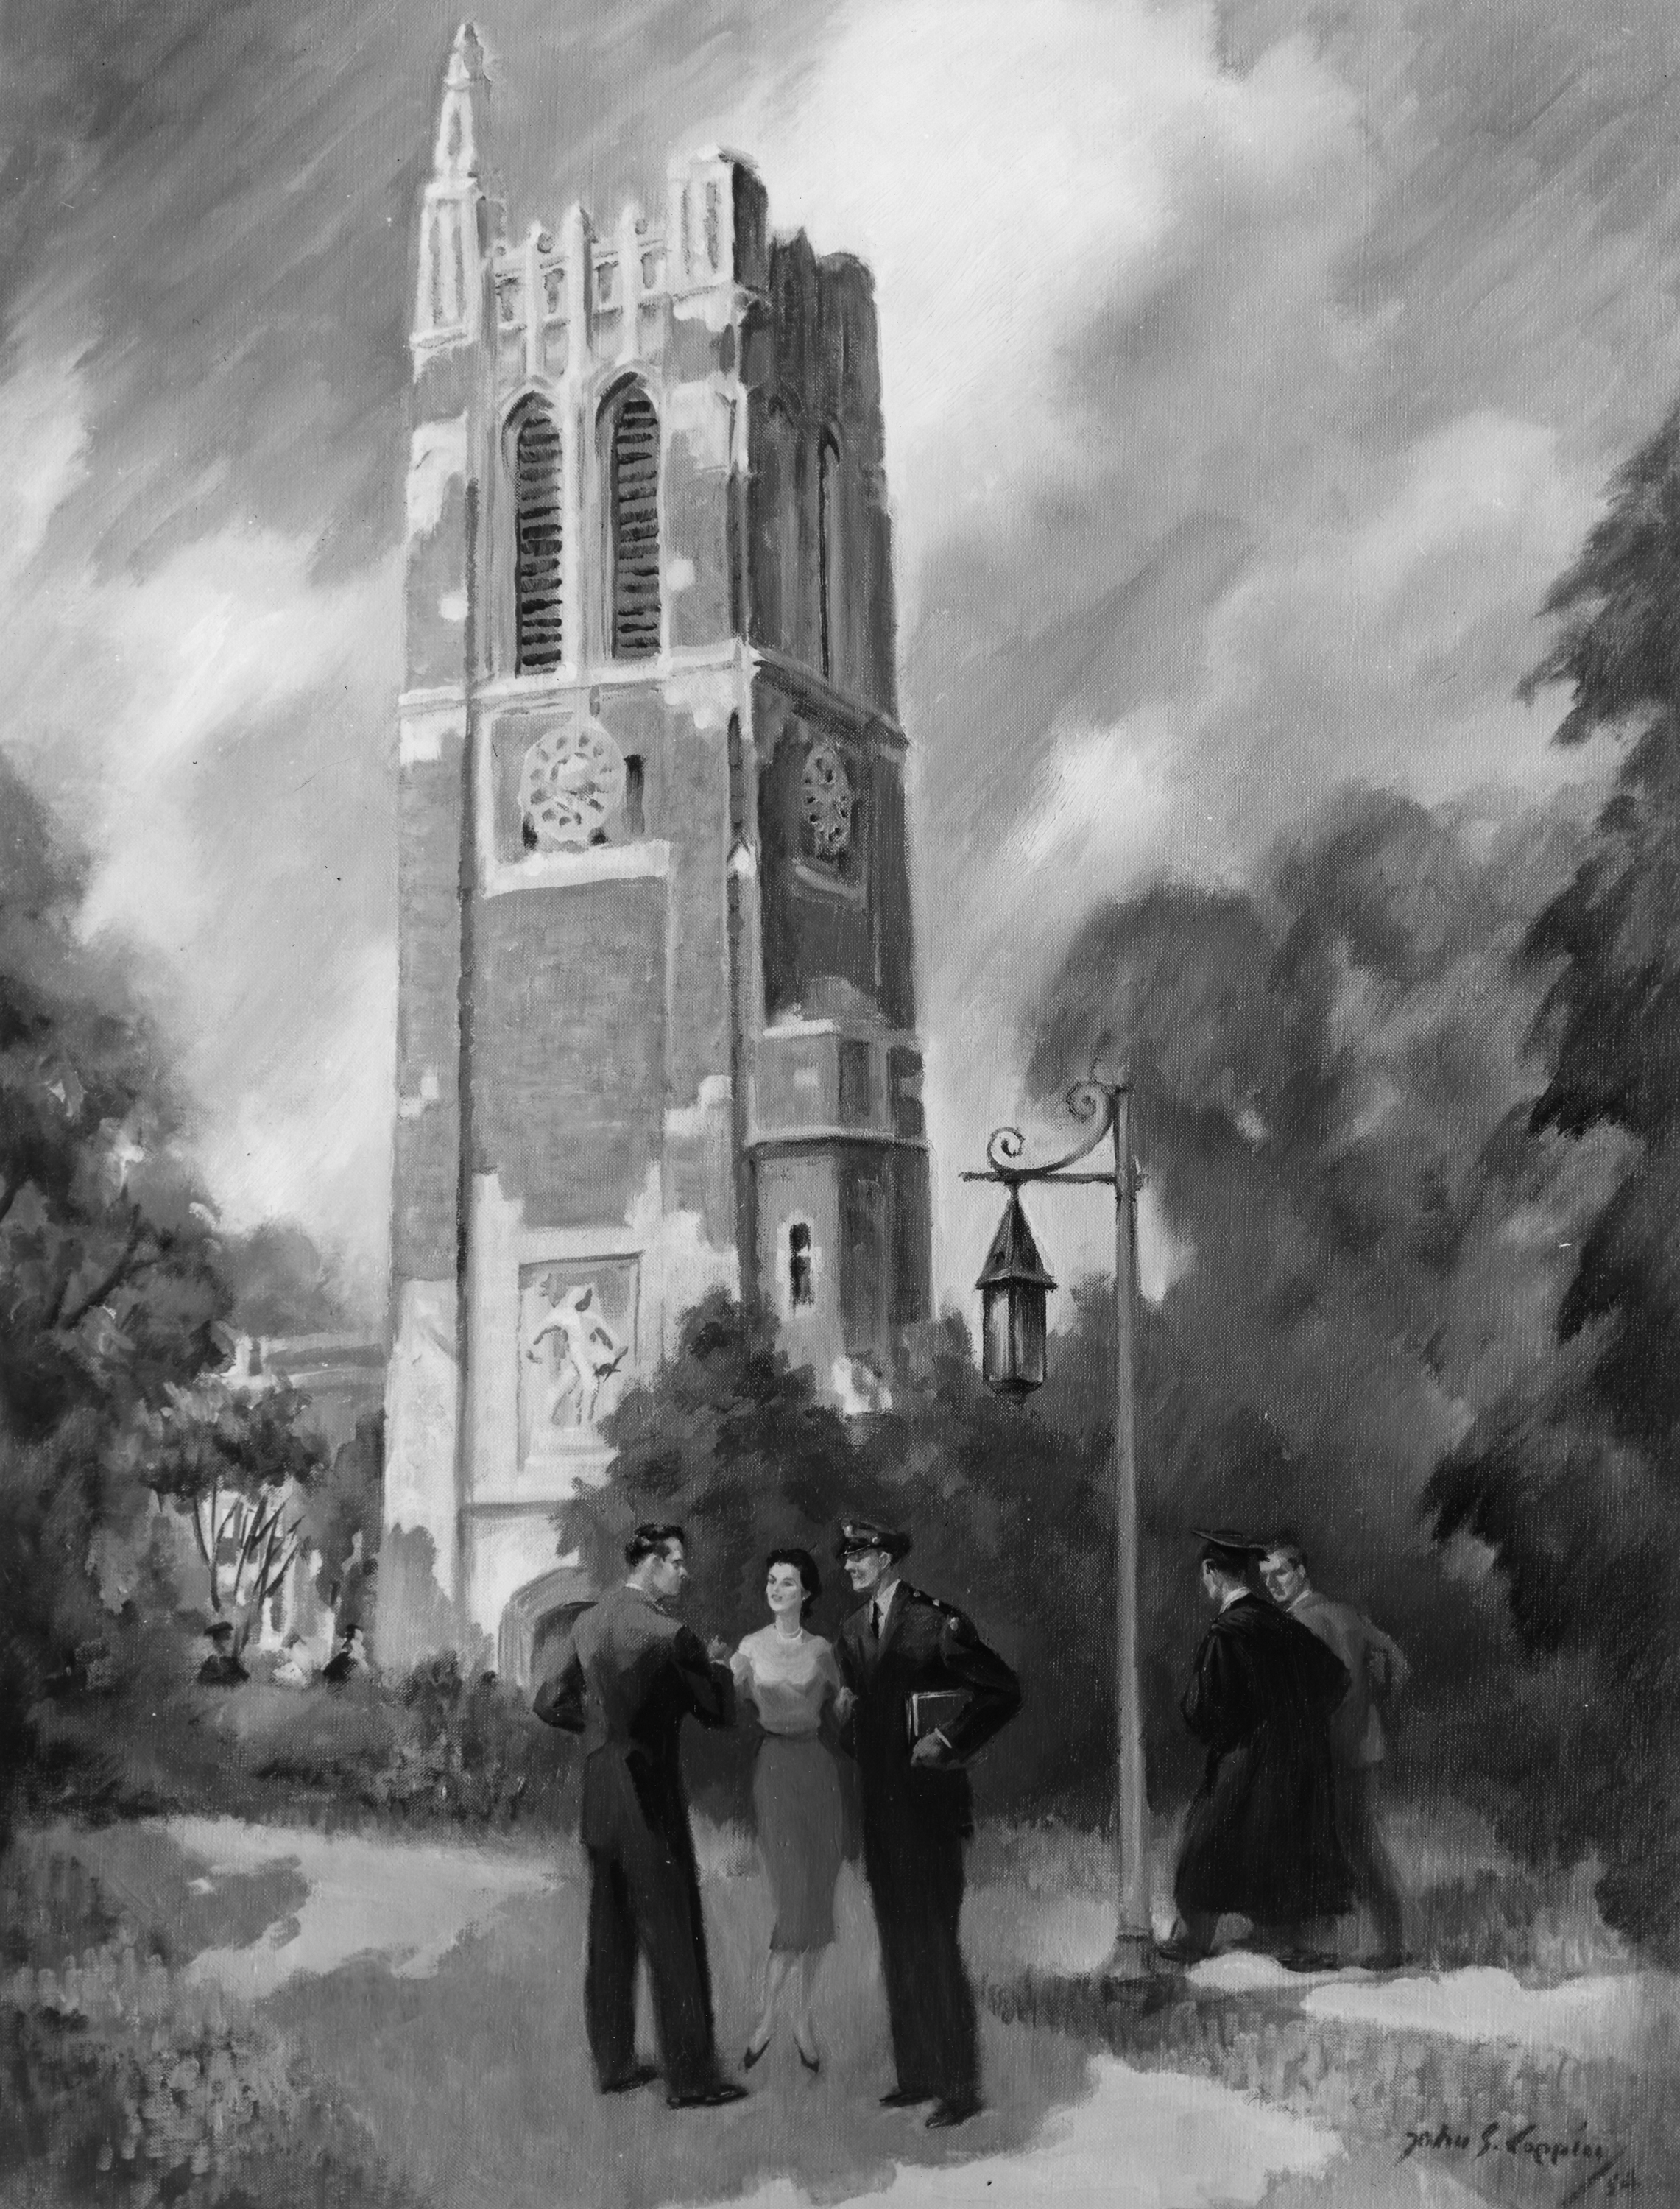 Painting of Beaumont Tower, undated